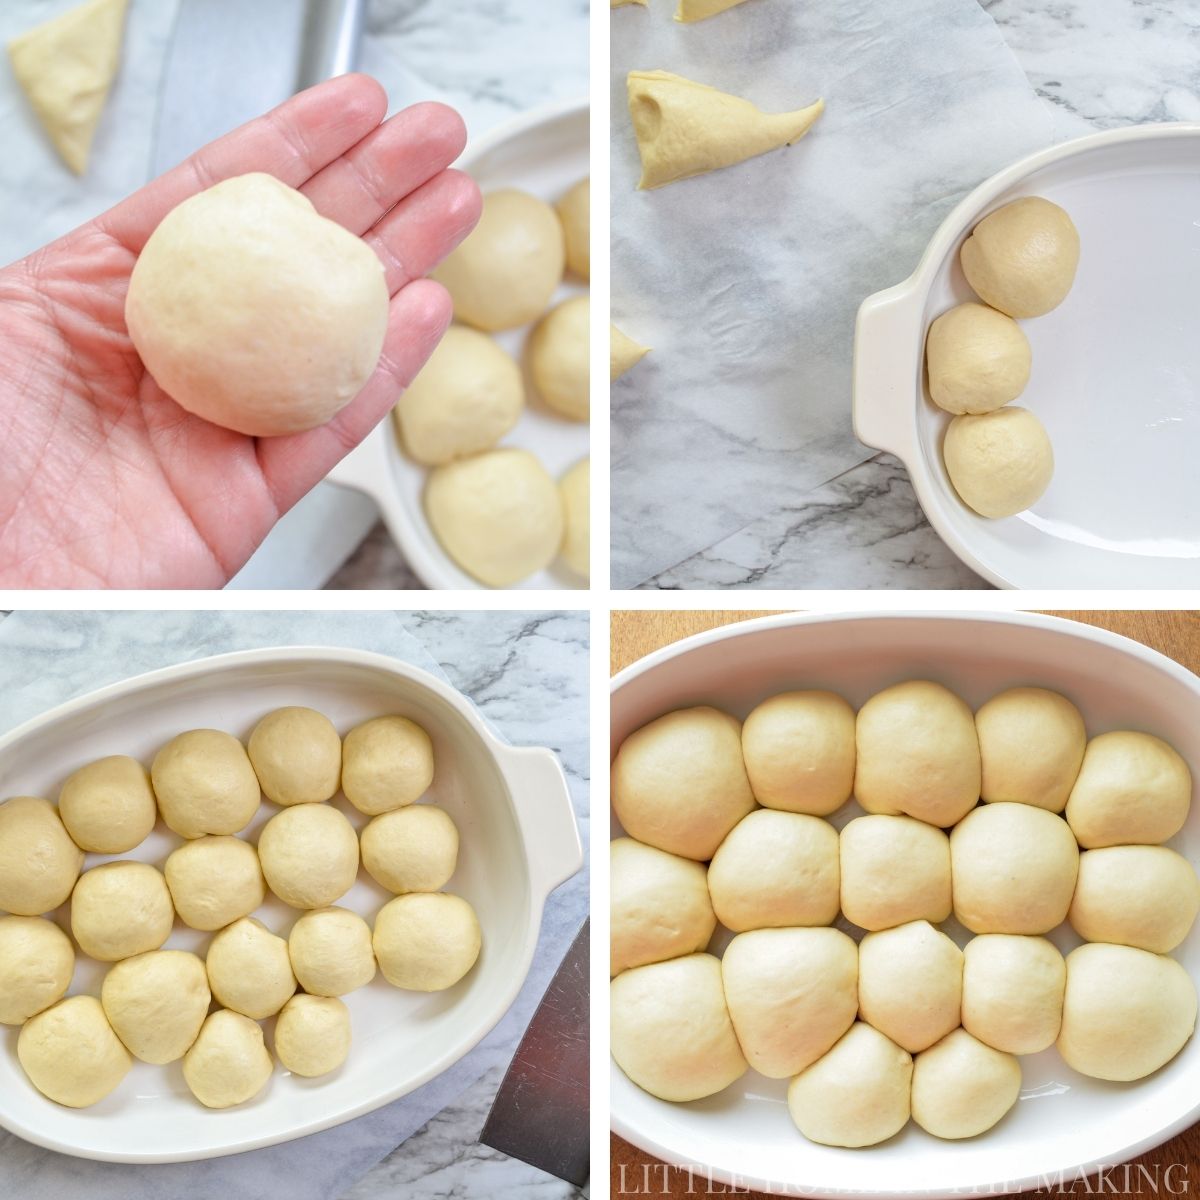 How to shape dinner rolls and rise in a baking dish.